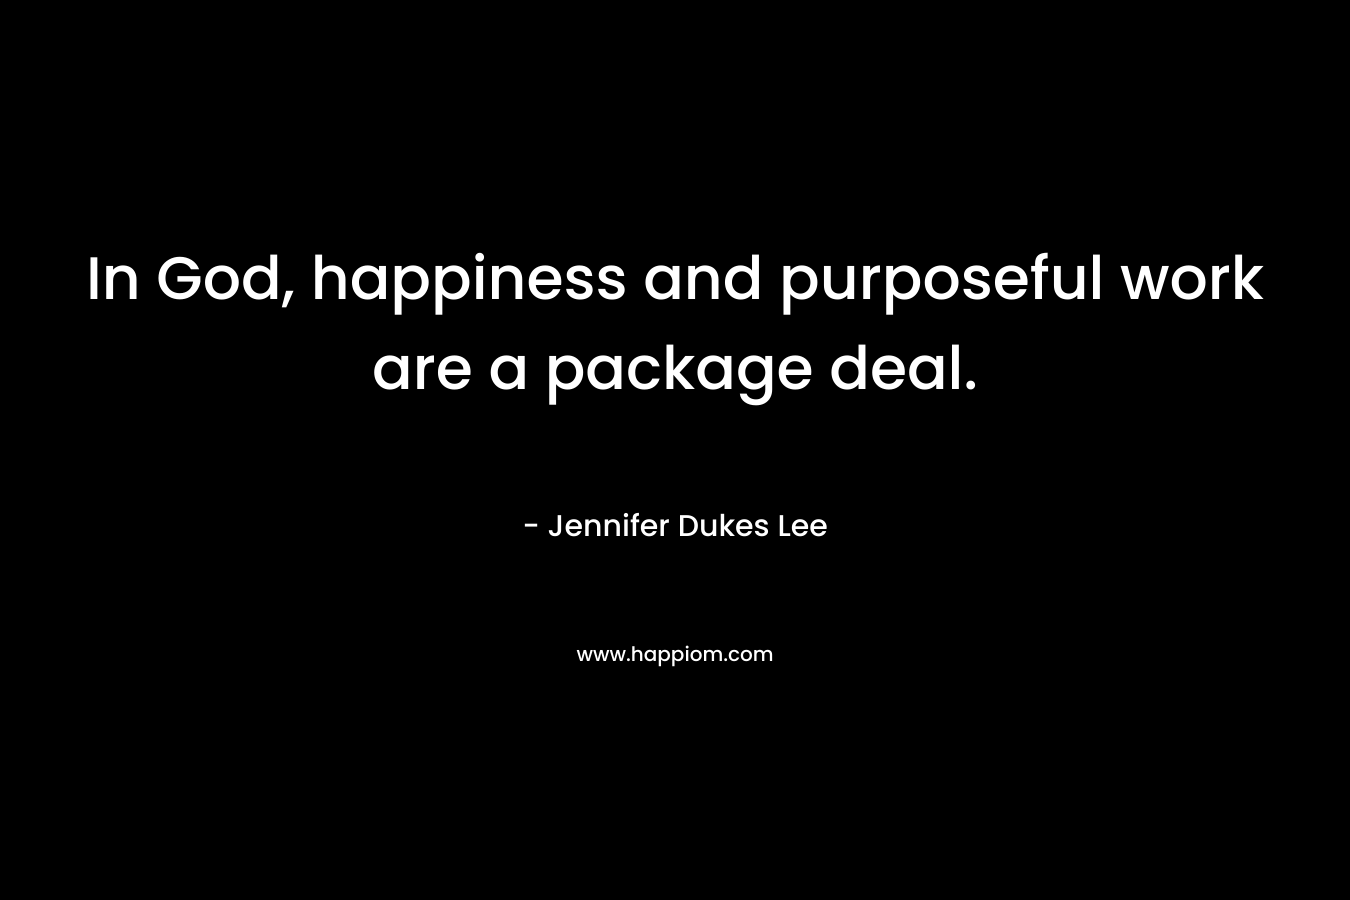 In God, happiness and purposeful work are a package deal.